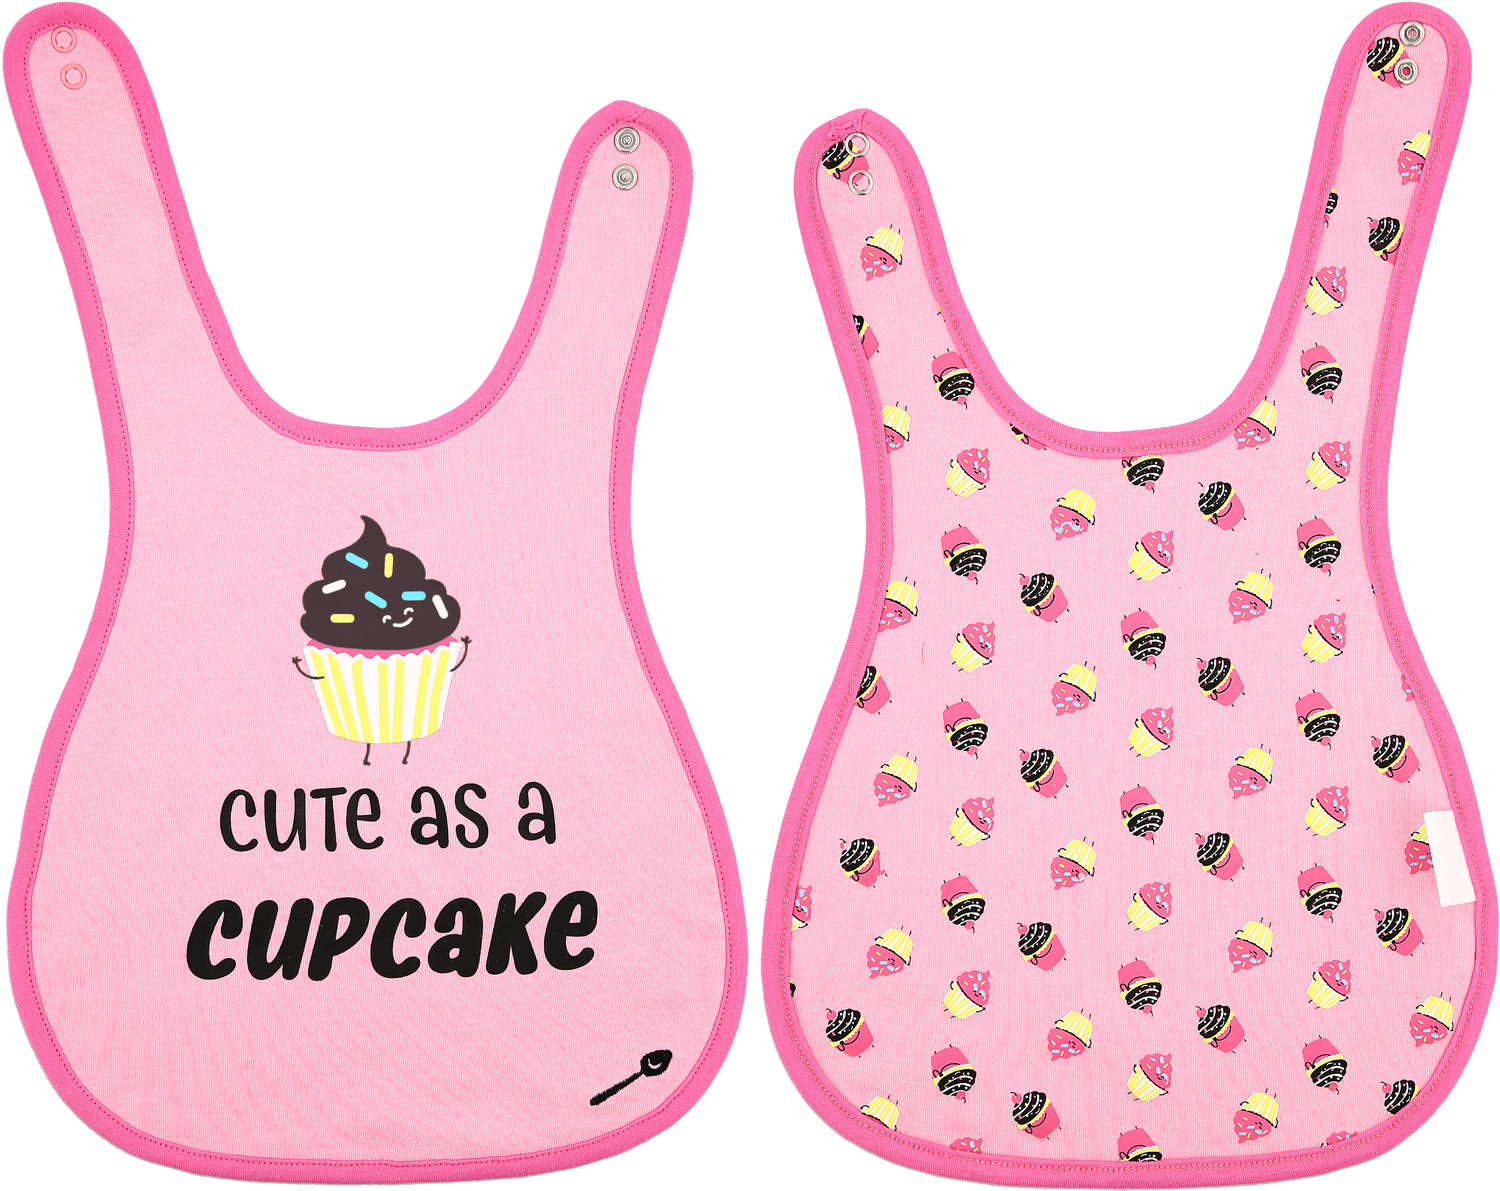 Cupcakes by Late Night Snacks - Cupcakes - Pink Reversible Bib 6 Months - 3 Years